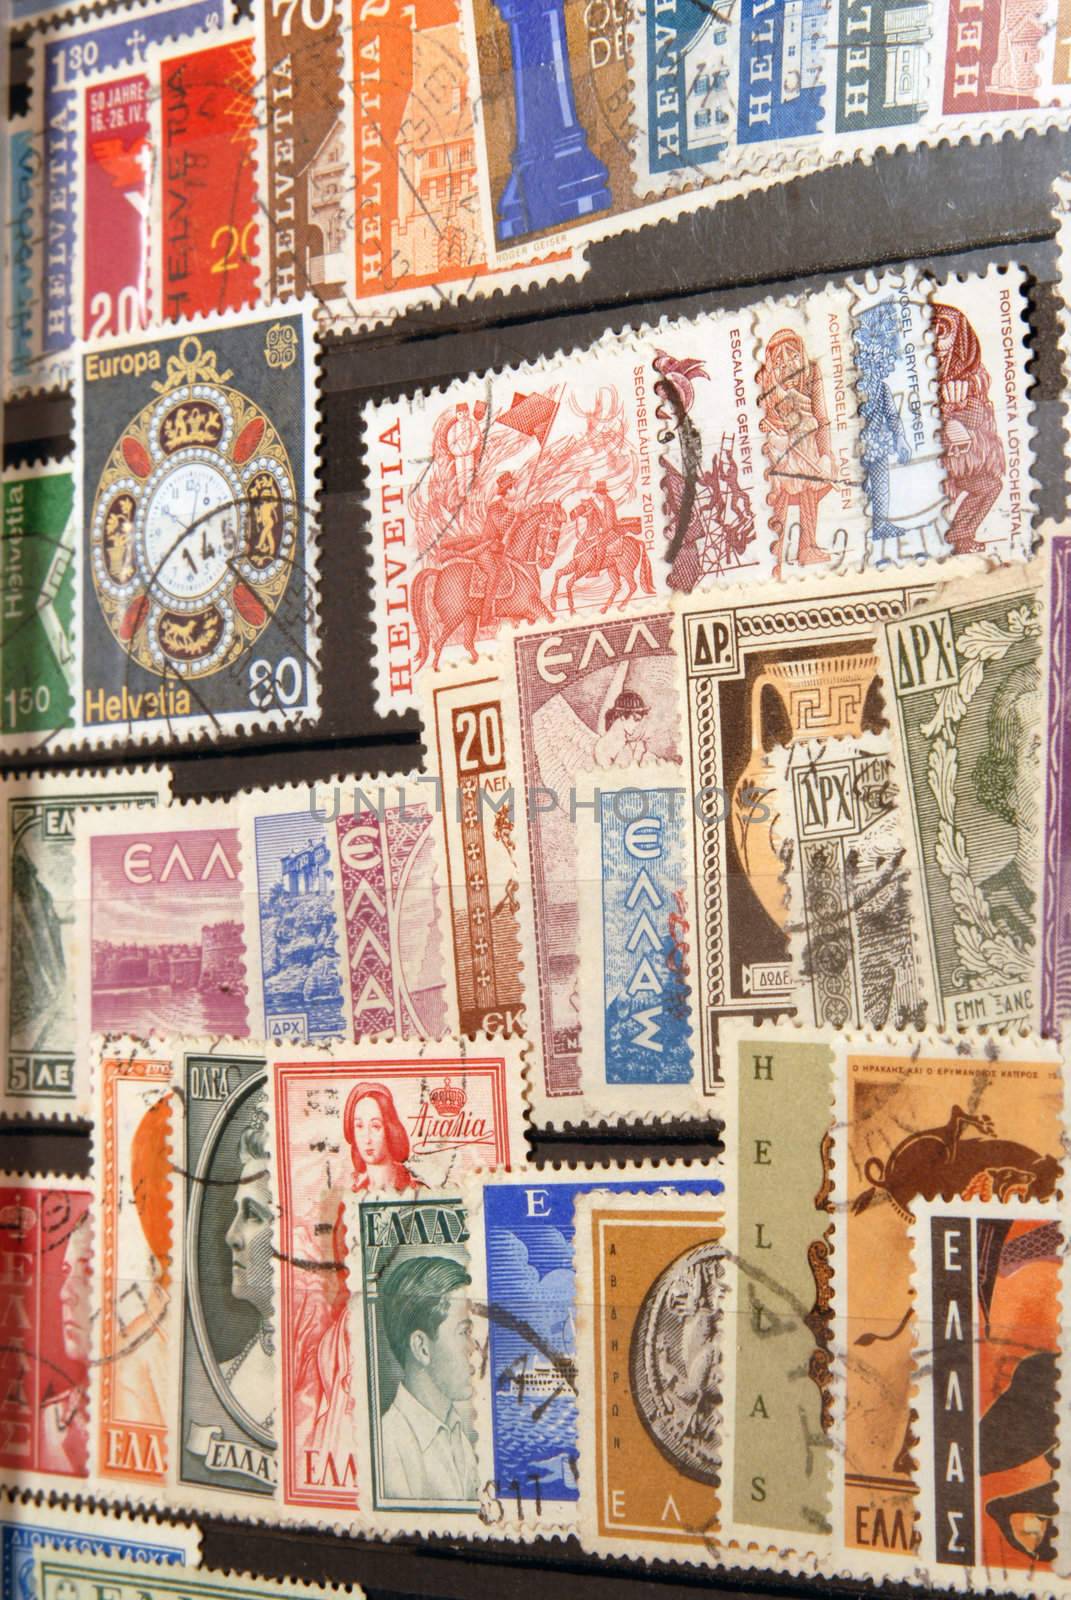 Stamp collection from Helvetia by cienpies